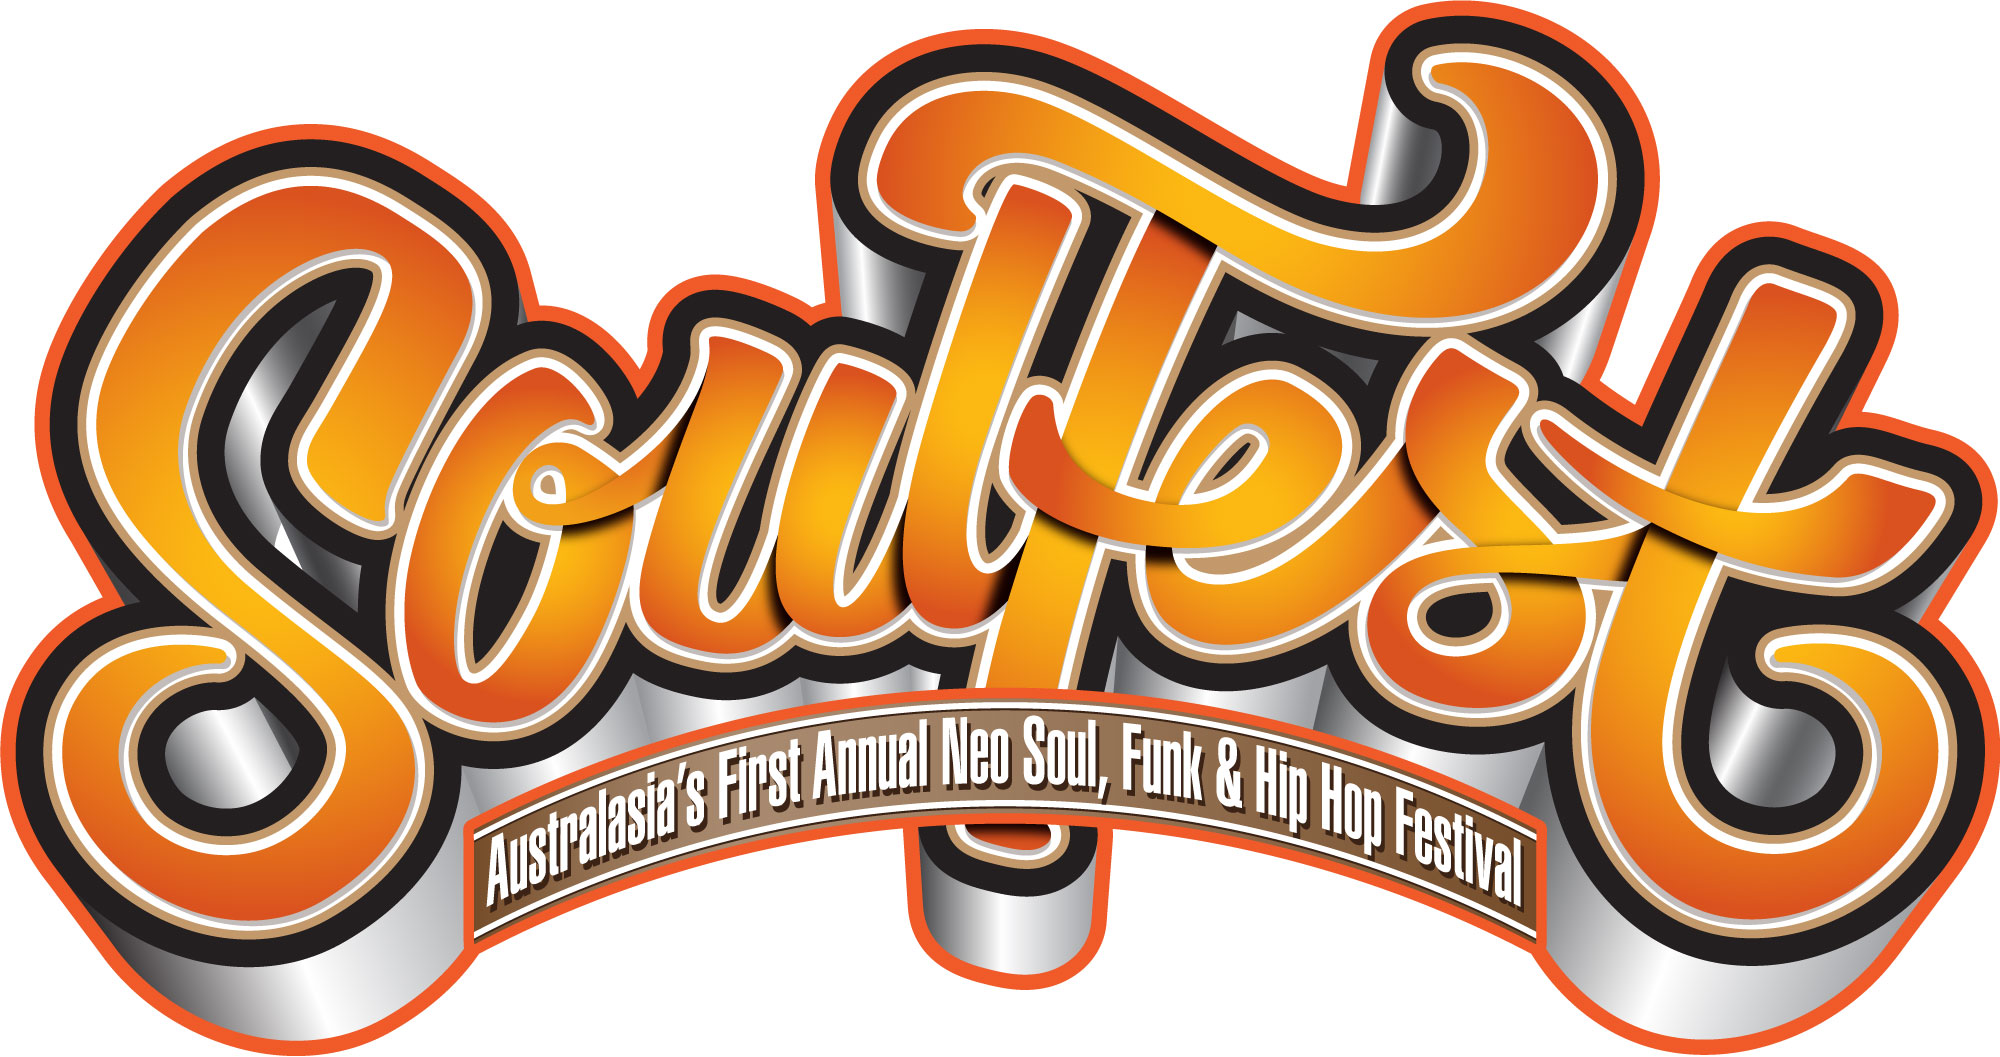 Soulfest promoter ordered to pay just under $500K for copyright infringement